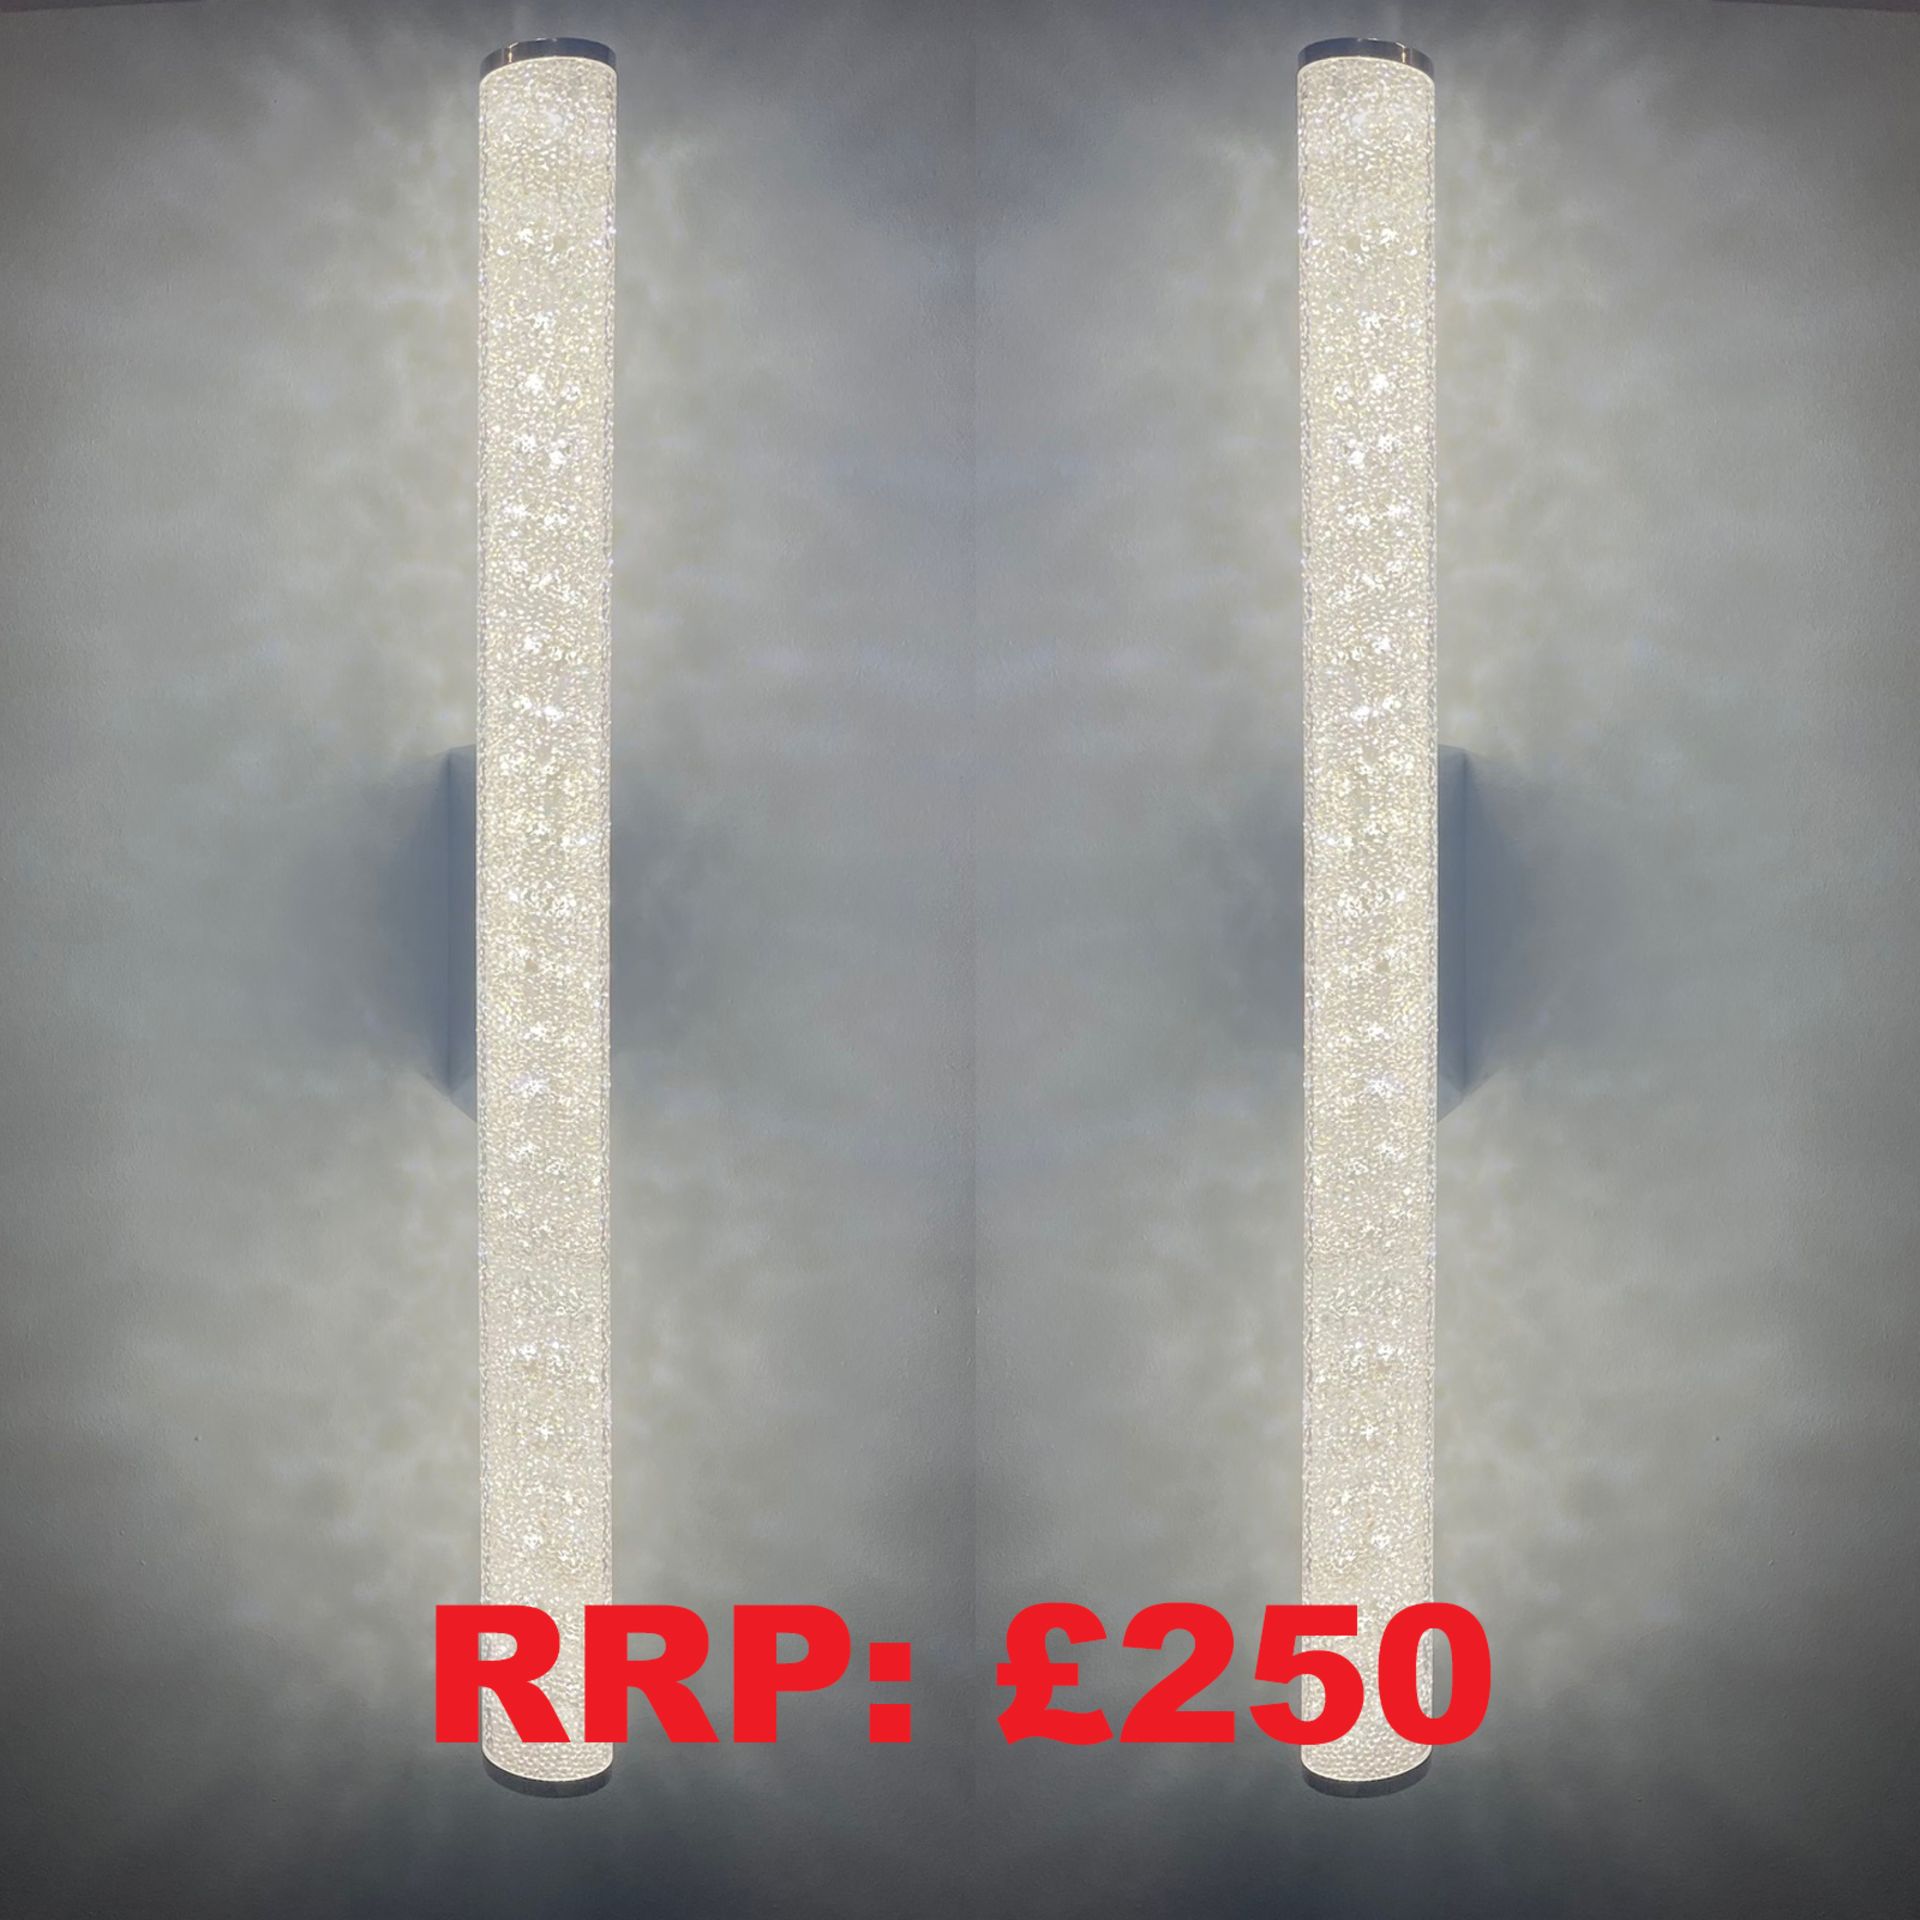 Pack of 2 Large Modern Crushed Crystal LED Bathroom Mirror Light Ceiling Light IP44 Cool White